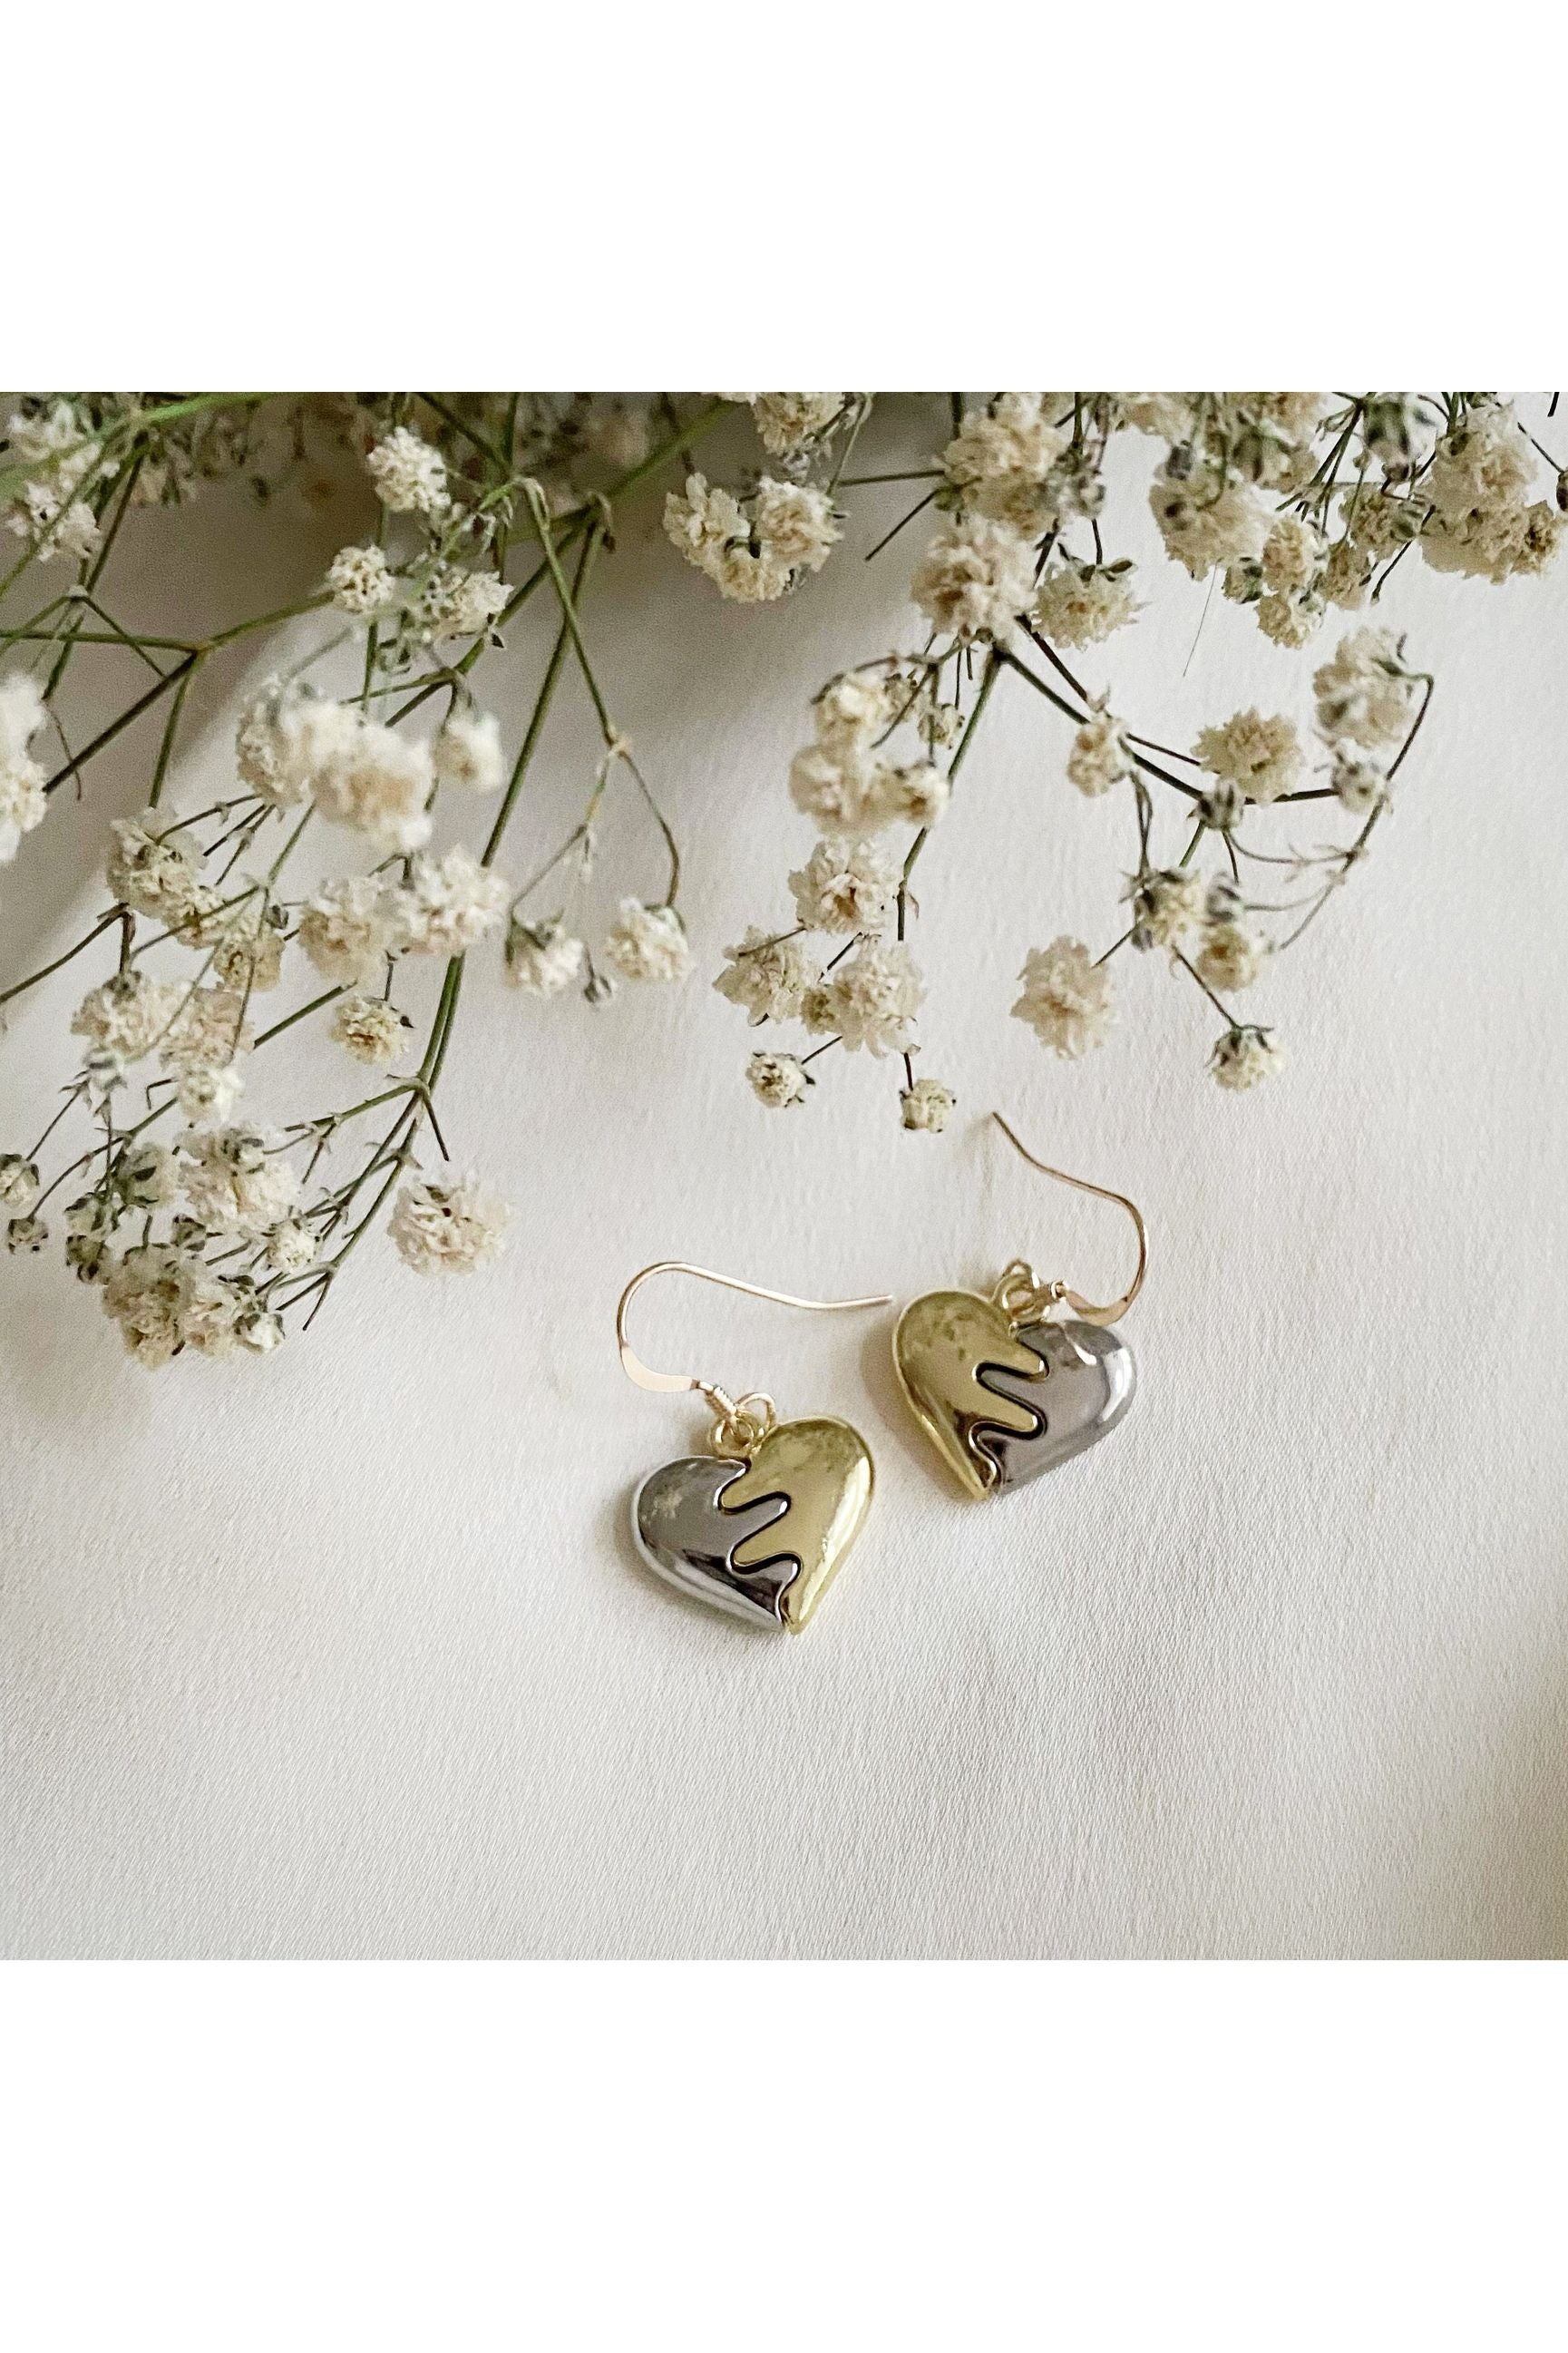 'Togetherness' Mixed Metal Heart Earrings togethernessearrings